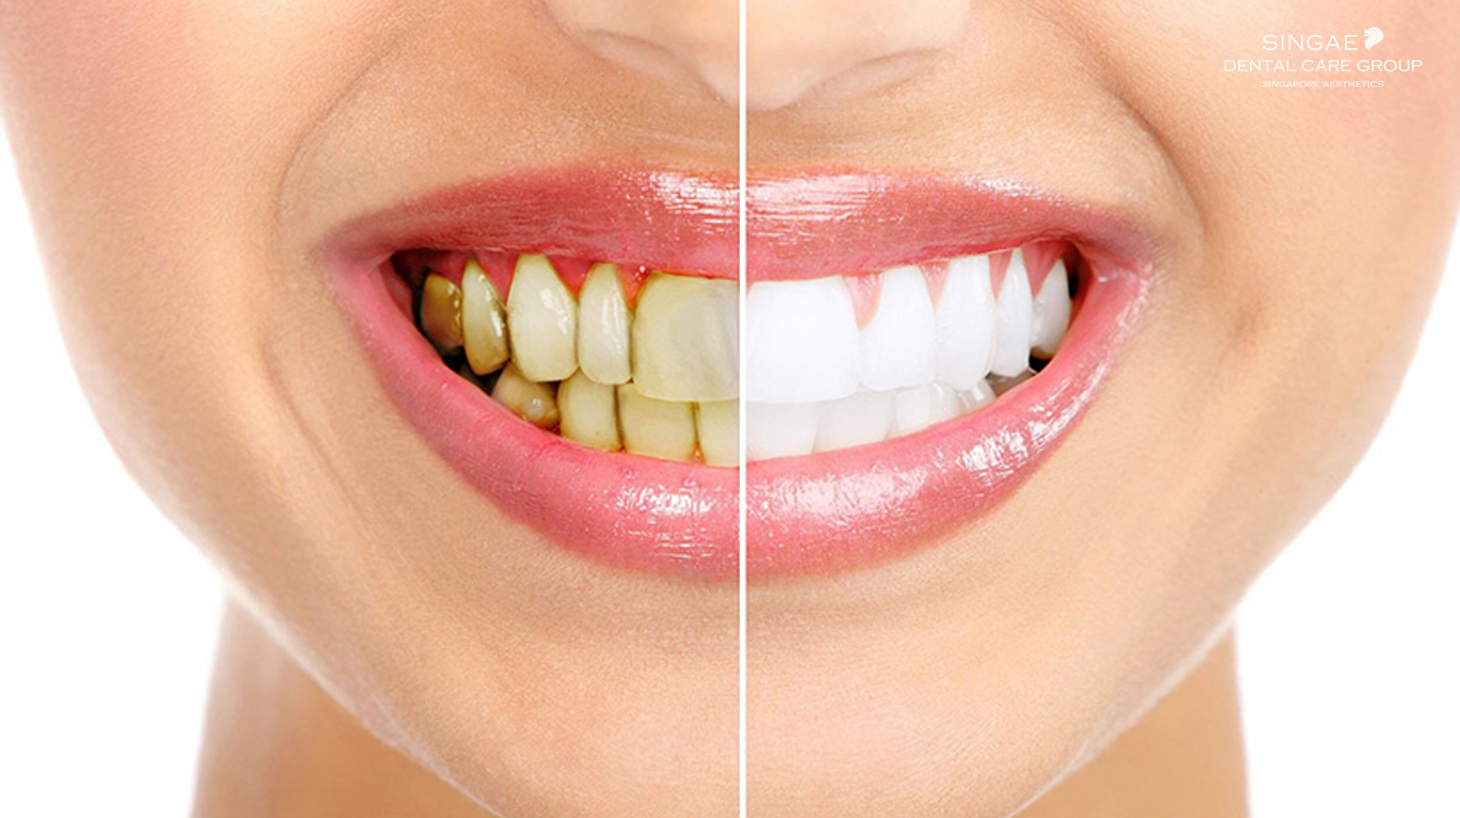 REVEAL THE MOST EFFECTIVE [HOW TO WHITEN YELLOW TEETH] FOR YOU